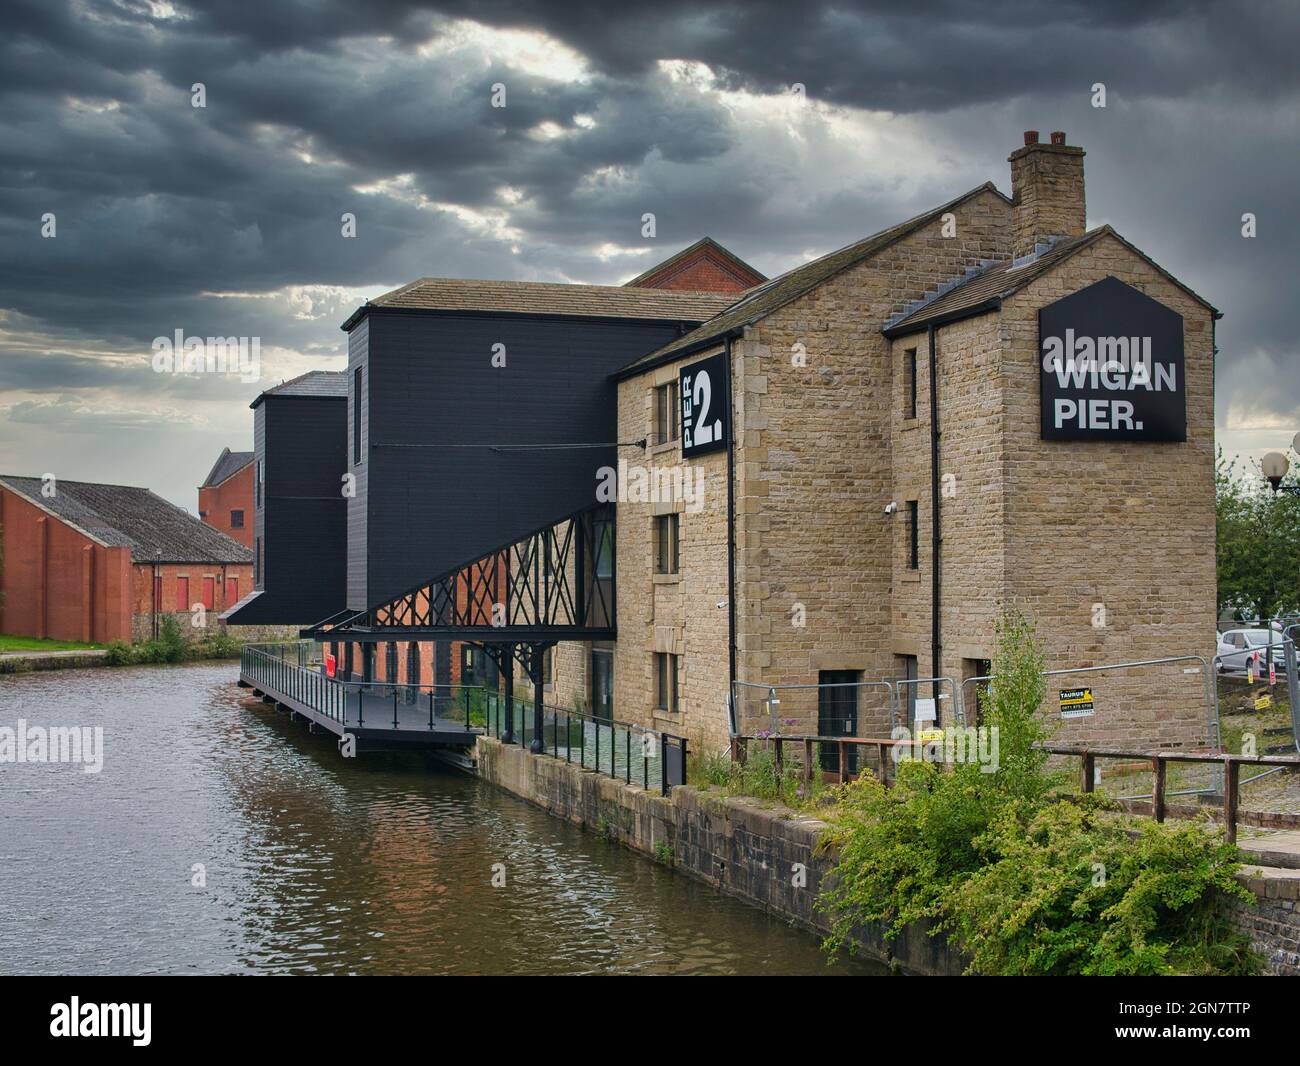 Warehouse buildings at Wigan Pier on the Leeds - Liverpool Canal. Now under redevelopment for housing and public access areas. Stock Photo